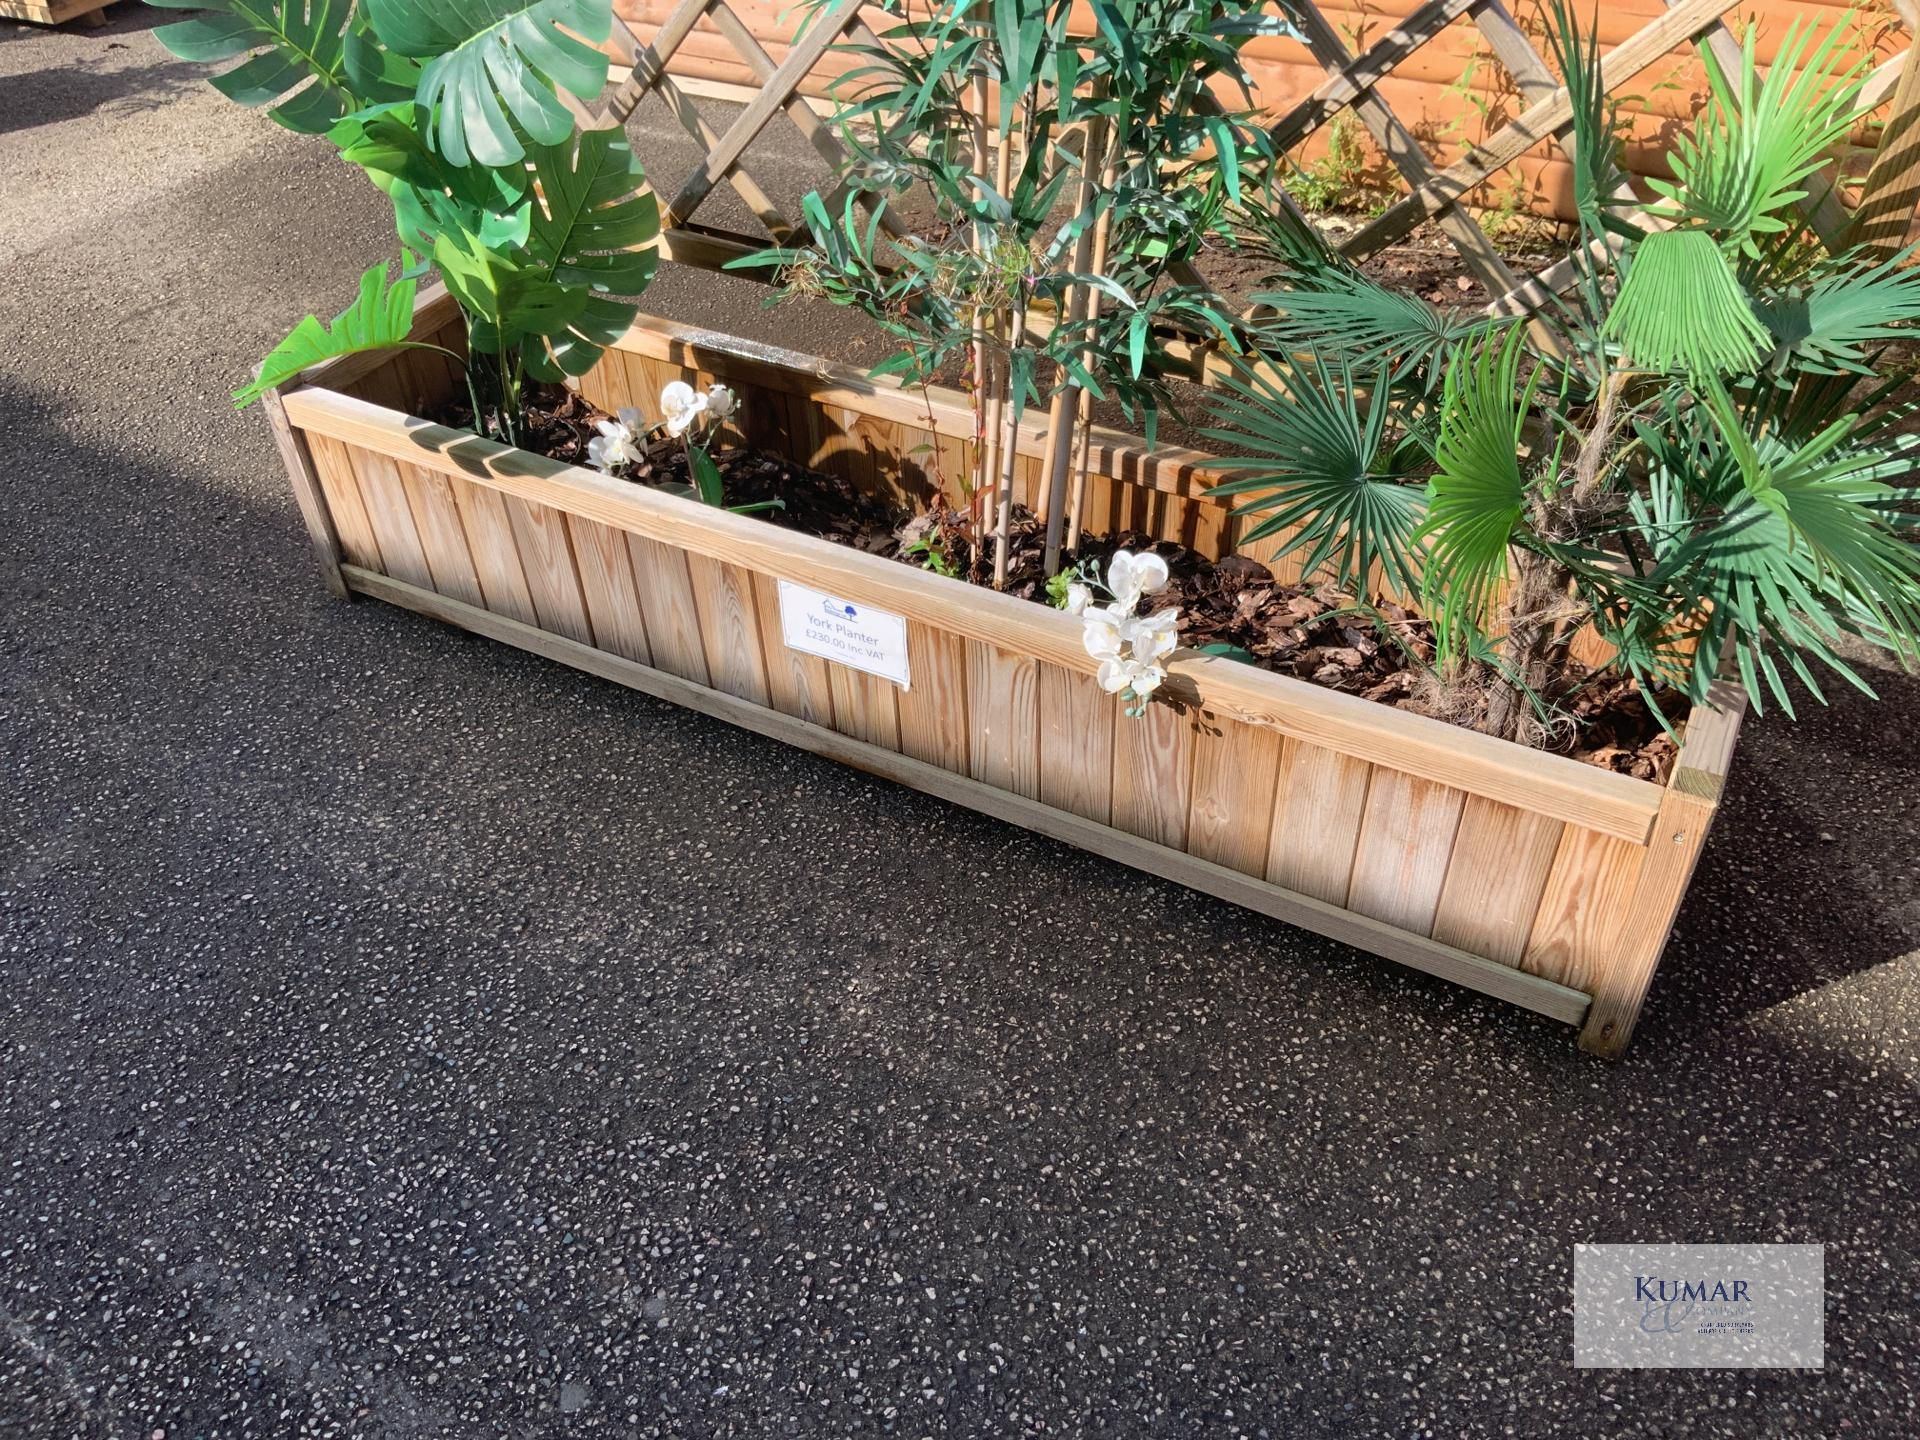 York Planter, Sizes (W x D x H) 1.80m x 0.4m x 1.65m RRP £230.00 with Contents As Shown - Image 2 of 6